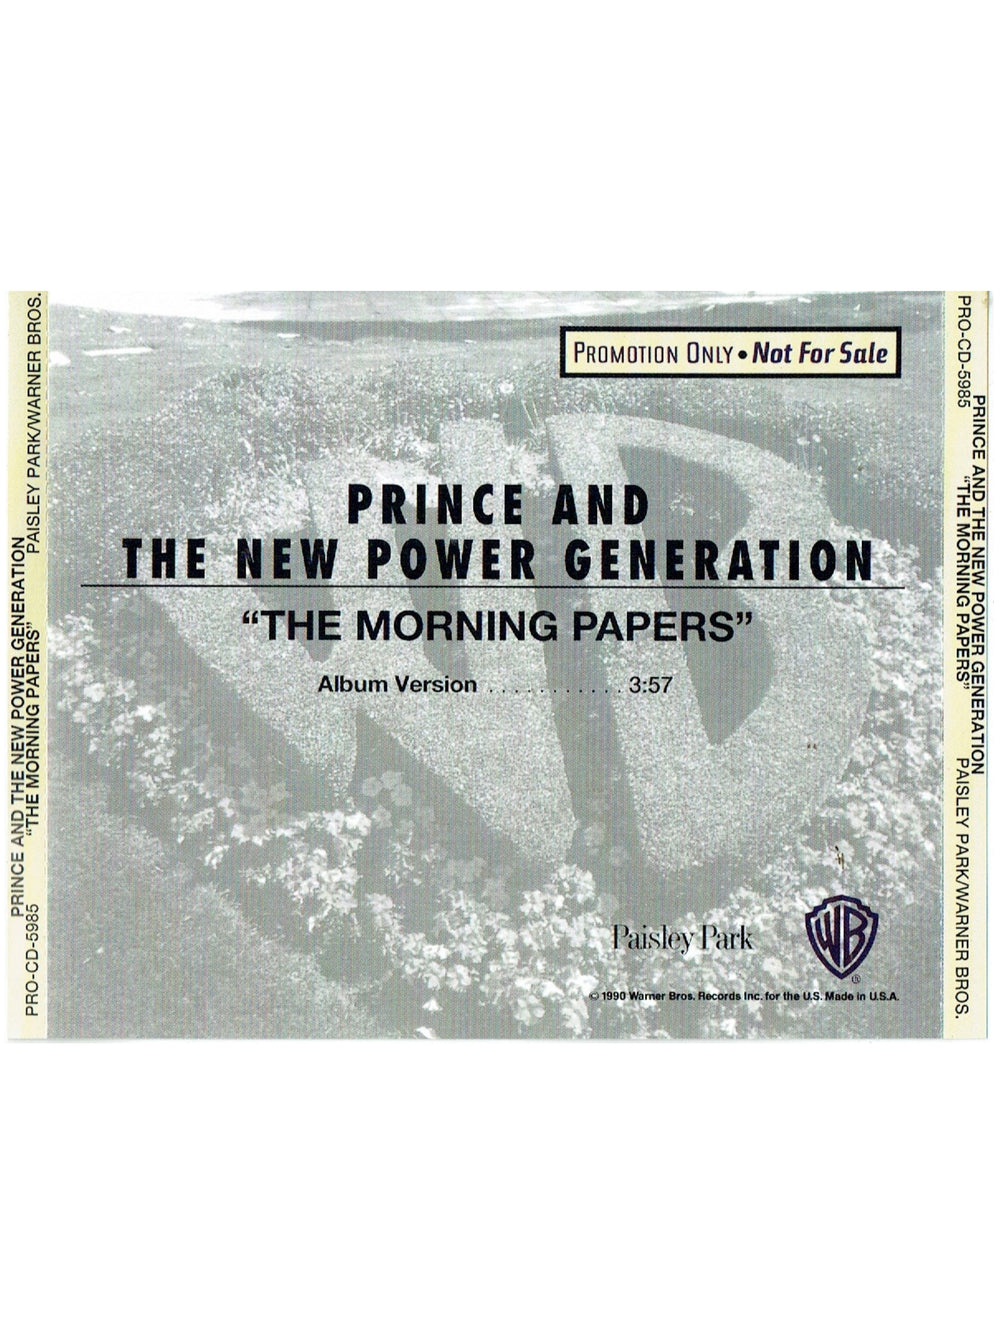 Prince – & The New Power Generation – The Morning Papers CD Single Promo US Preloved: 1992